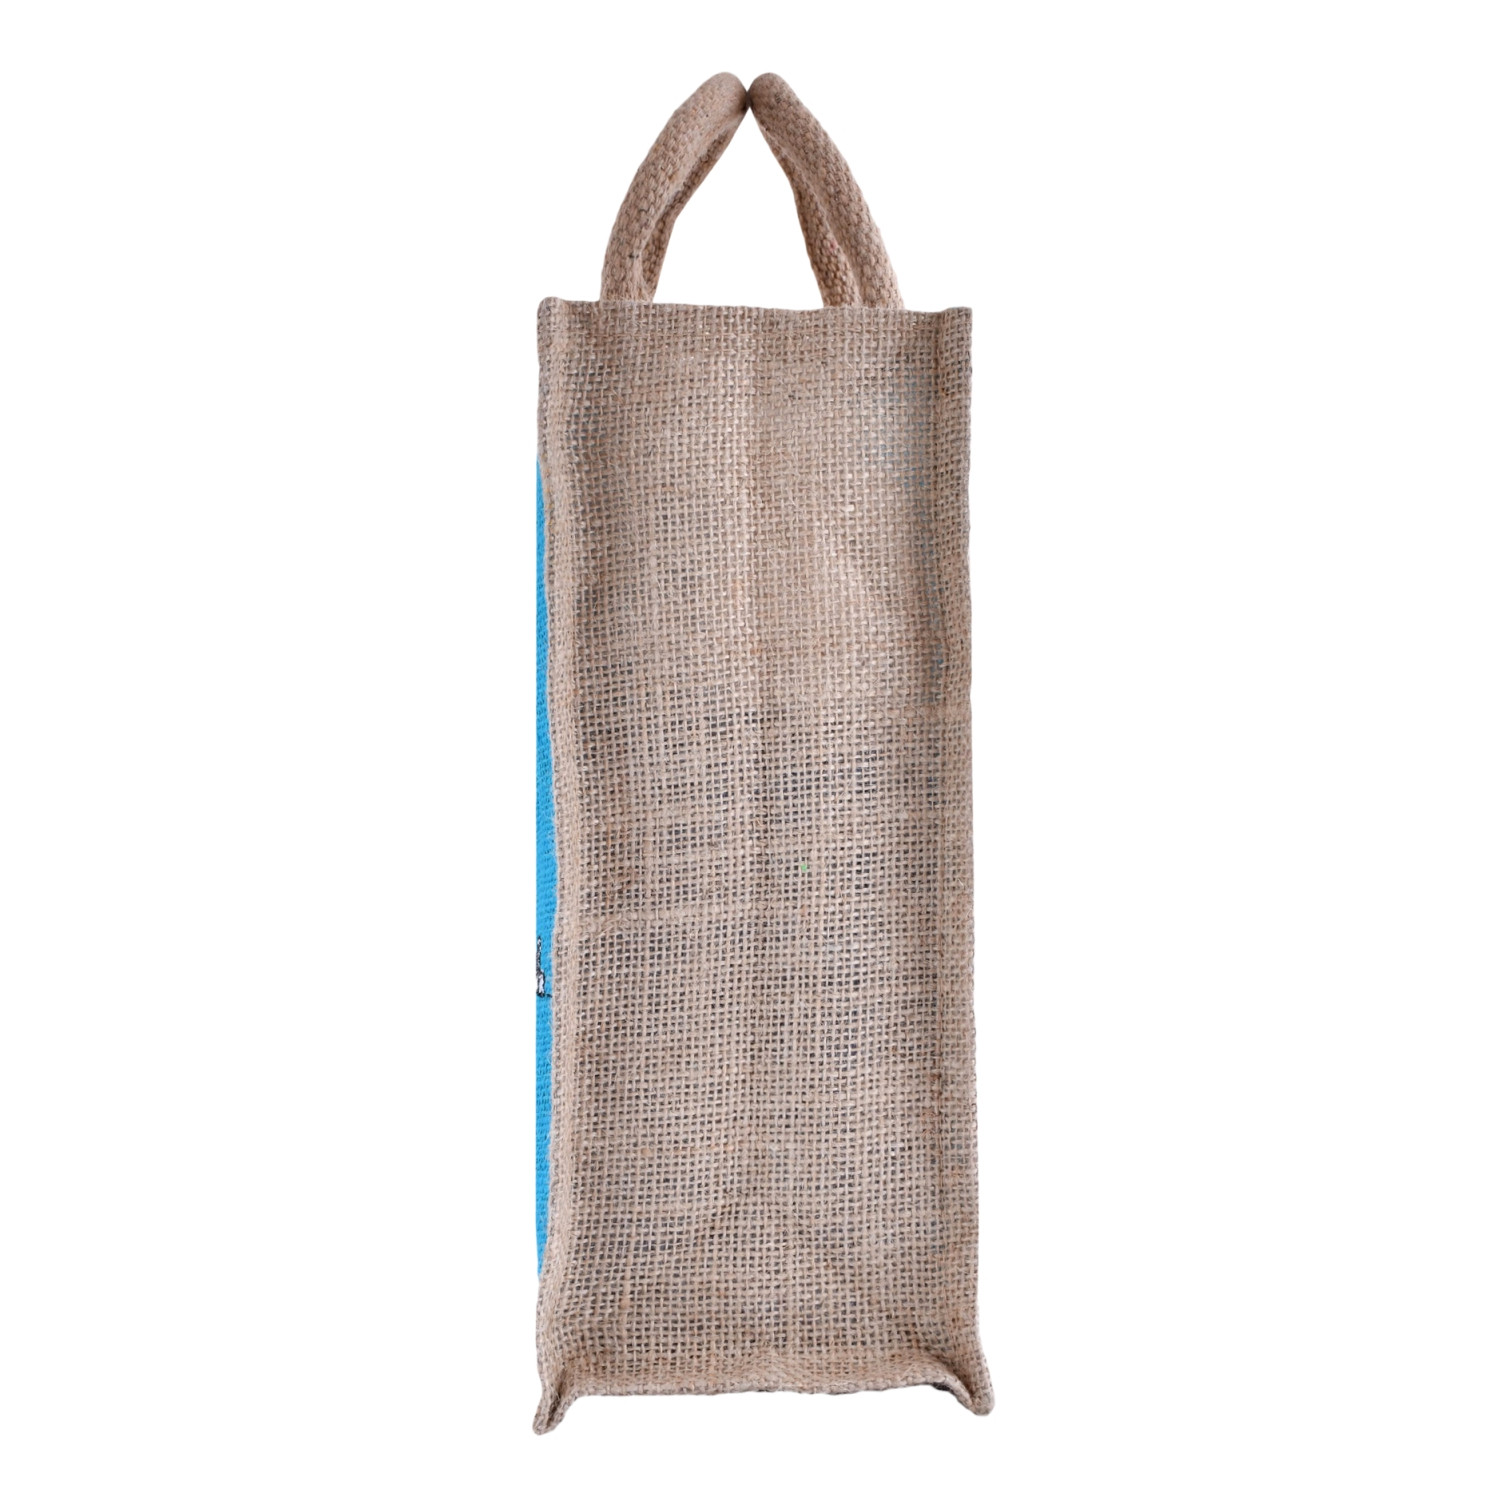 Kuber Industries Grocery Bag | Jute Carry Bag | Lunch Bags for Office | Zipper Grocery Bag with Handle | Vegetable Bag | Blue Happiness Shopping Bag | Medium | Brown